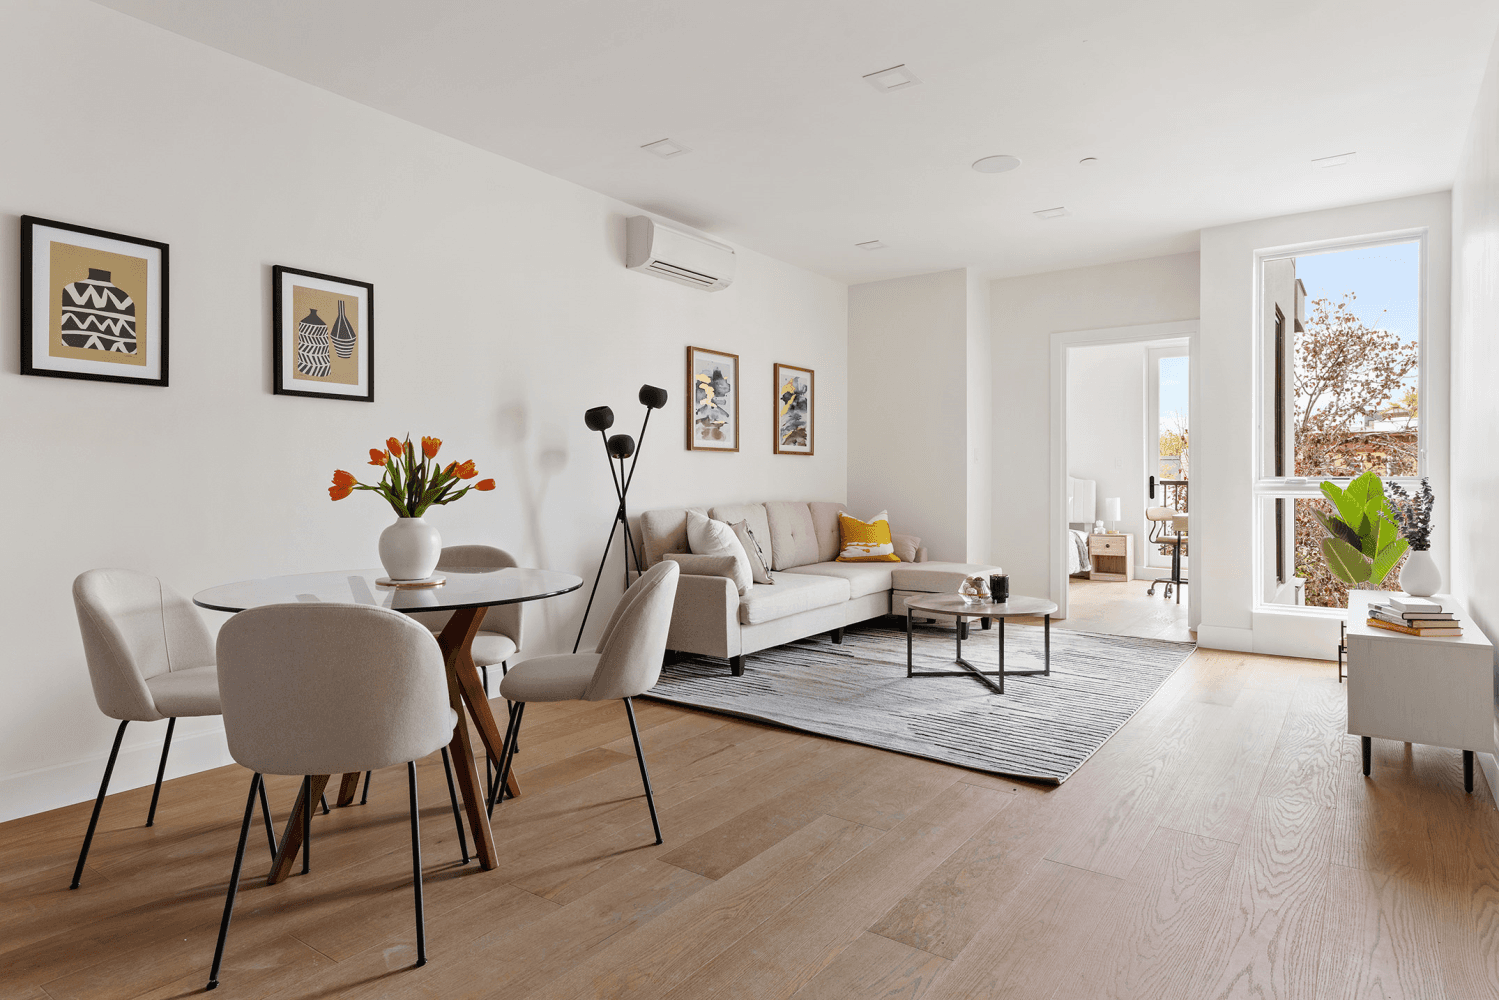 Enjoy a cozy Brooklyn lifestyle at the convergence of Greenwood Heights and South Slope in this brand new 2 bedroom, 2 bathroom condo with beautiful finishes and private outdoor space.